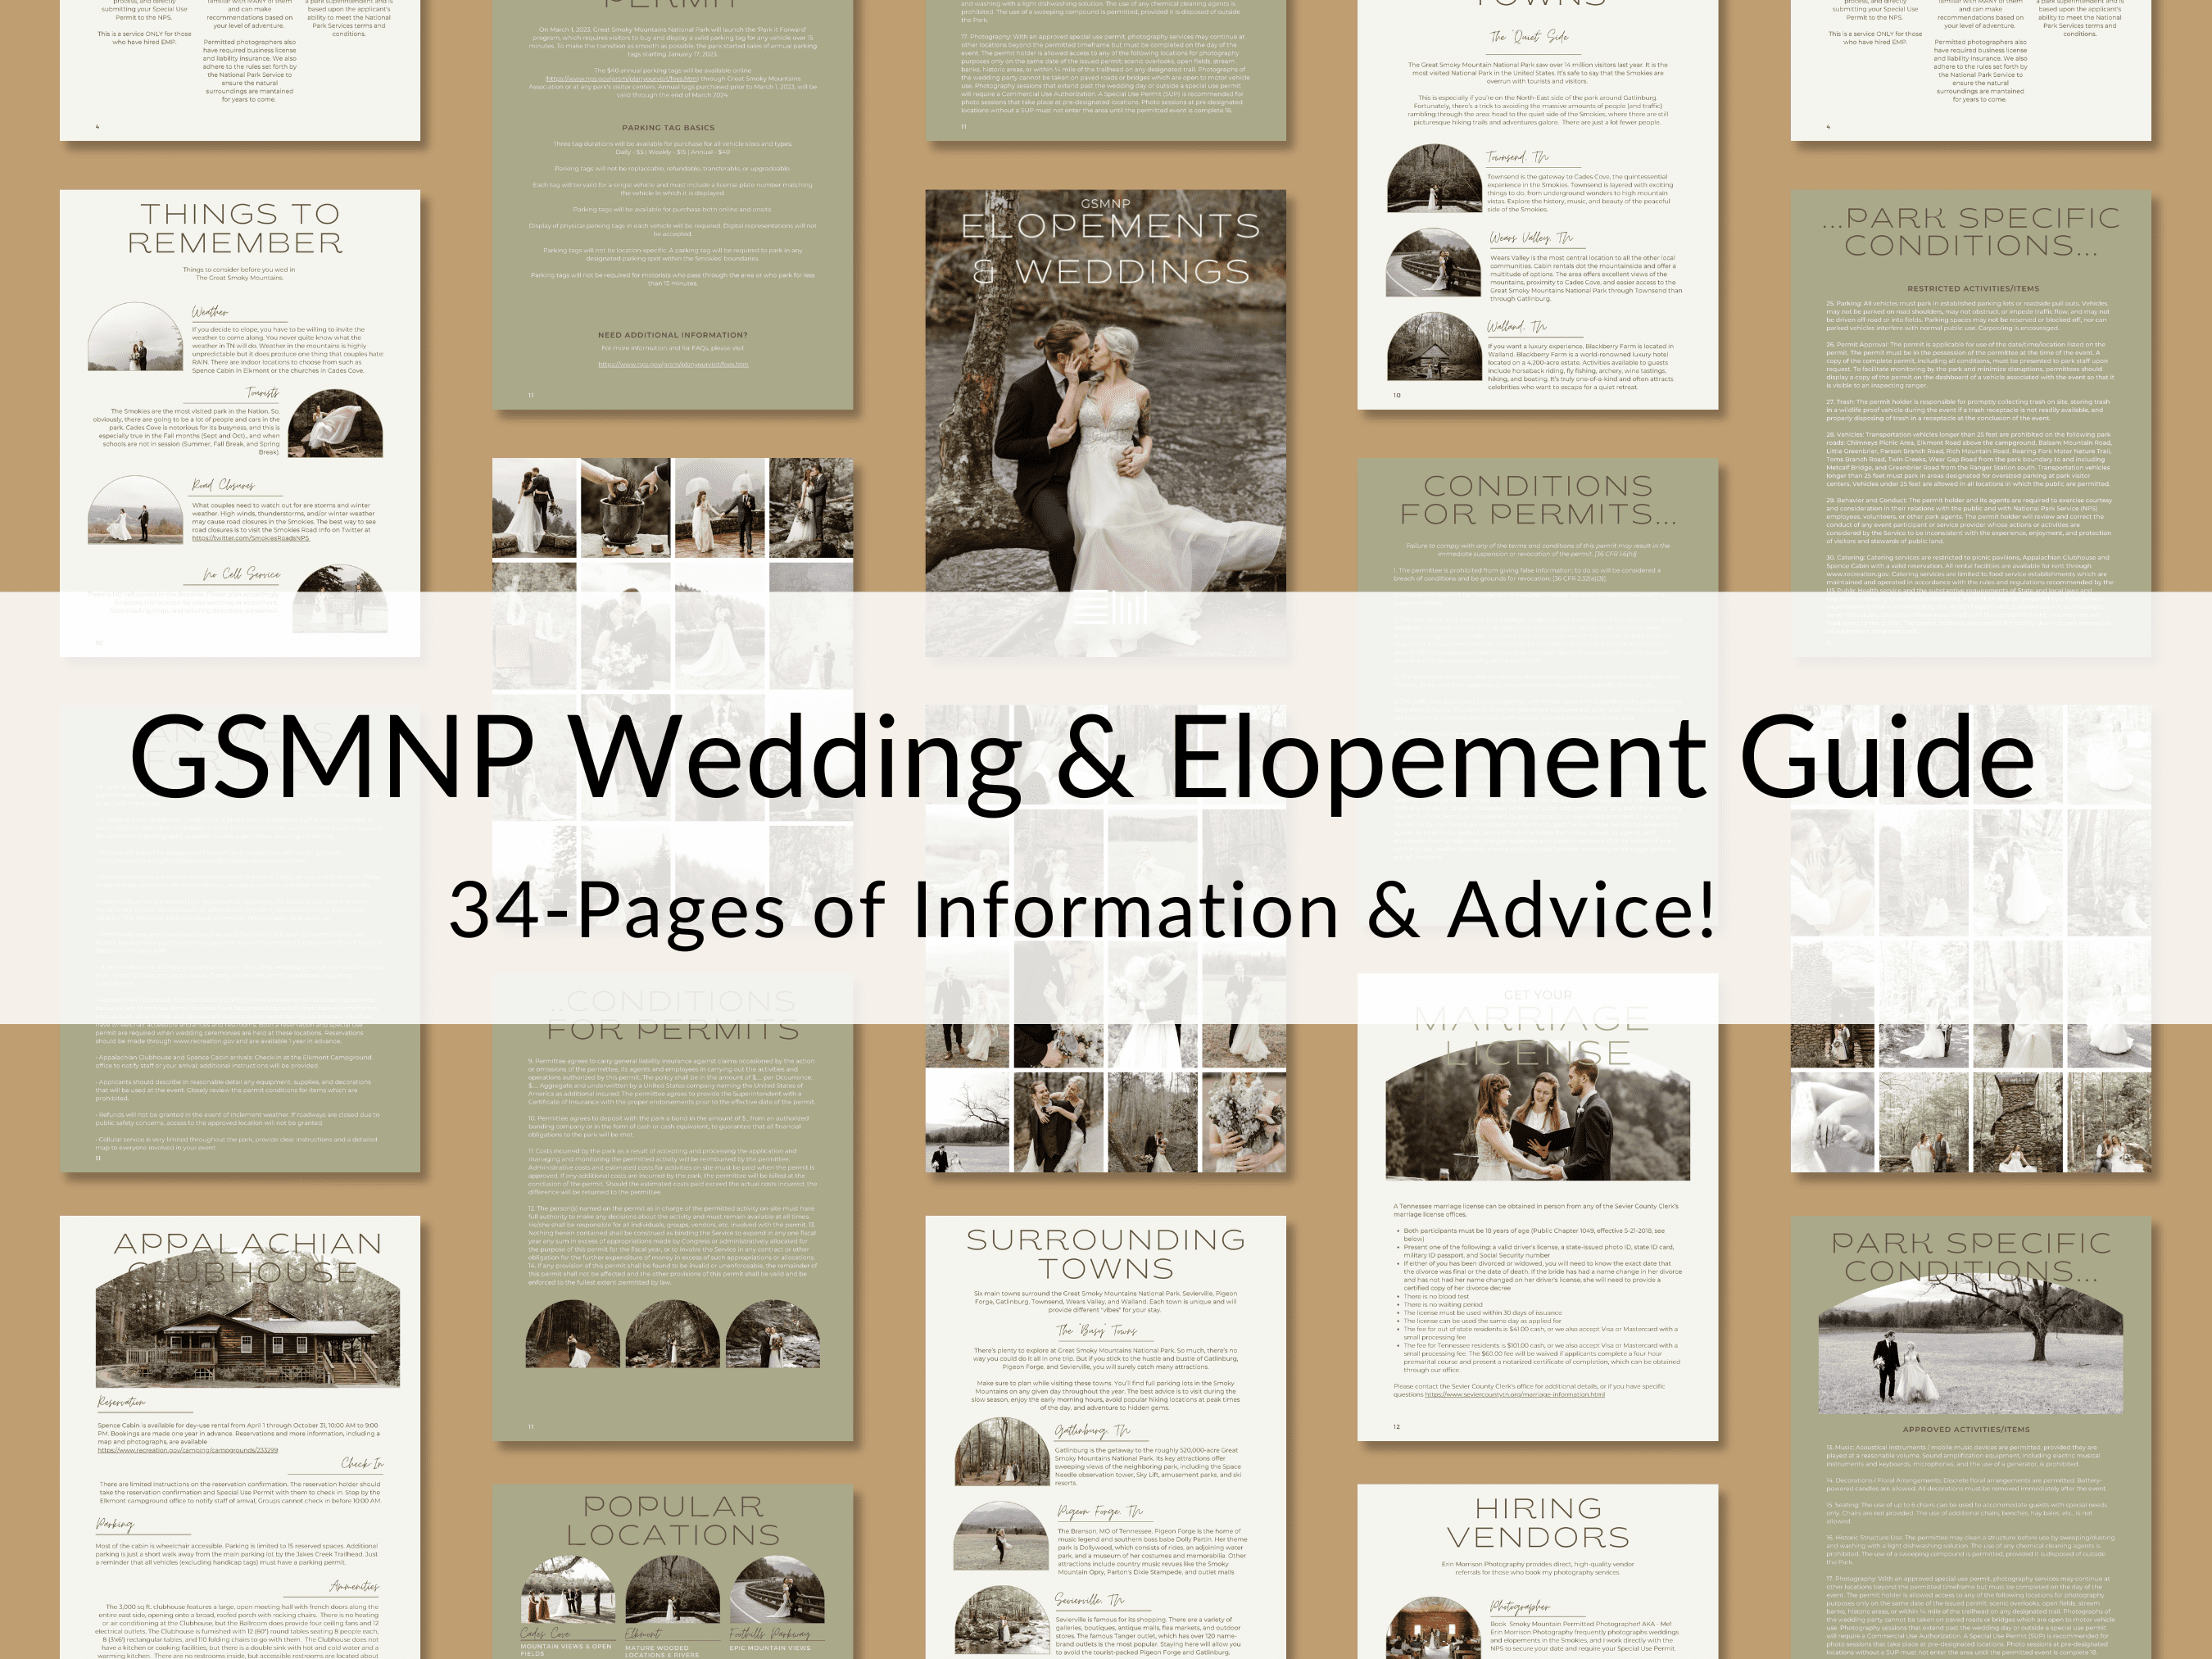 Wedding and Elopement Guide for The Great Smoky Mountains National Park